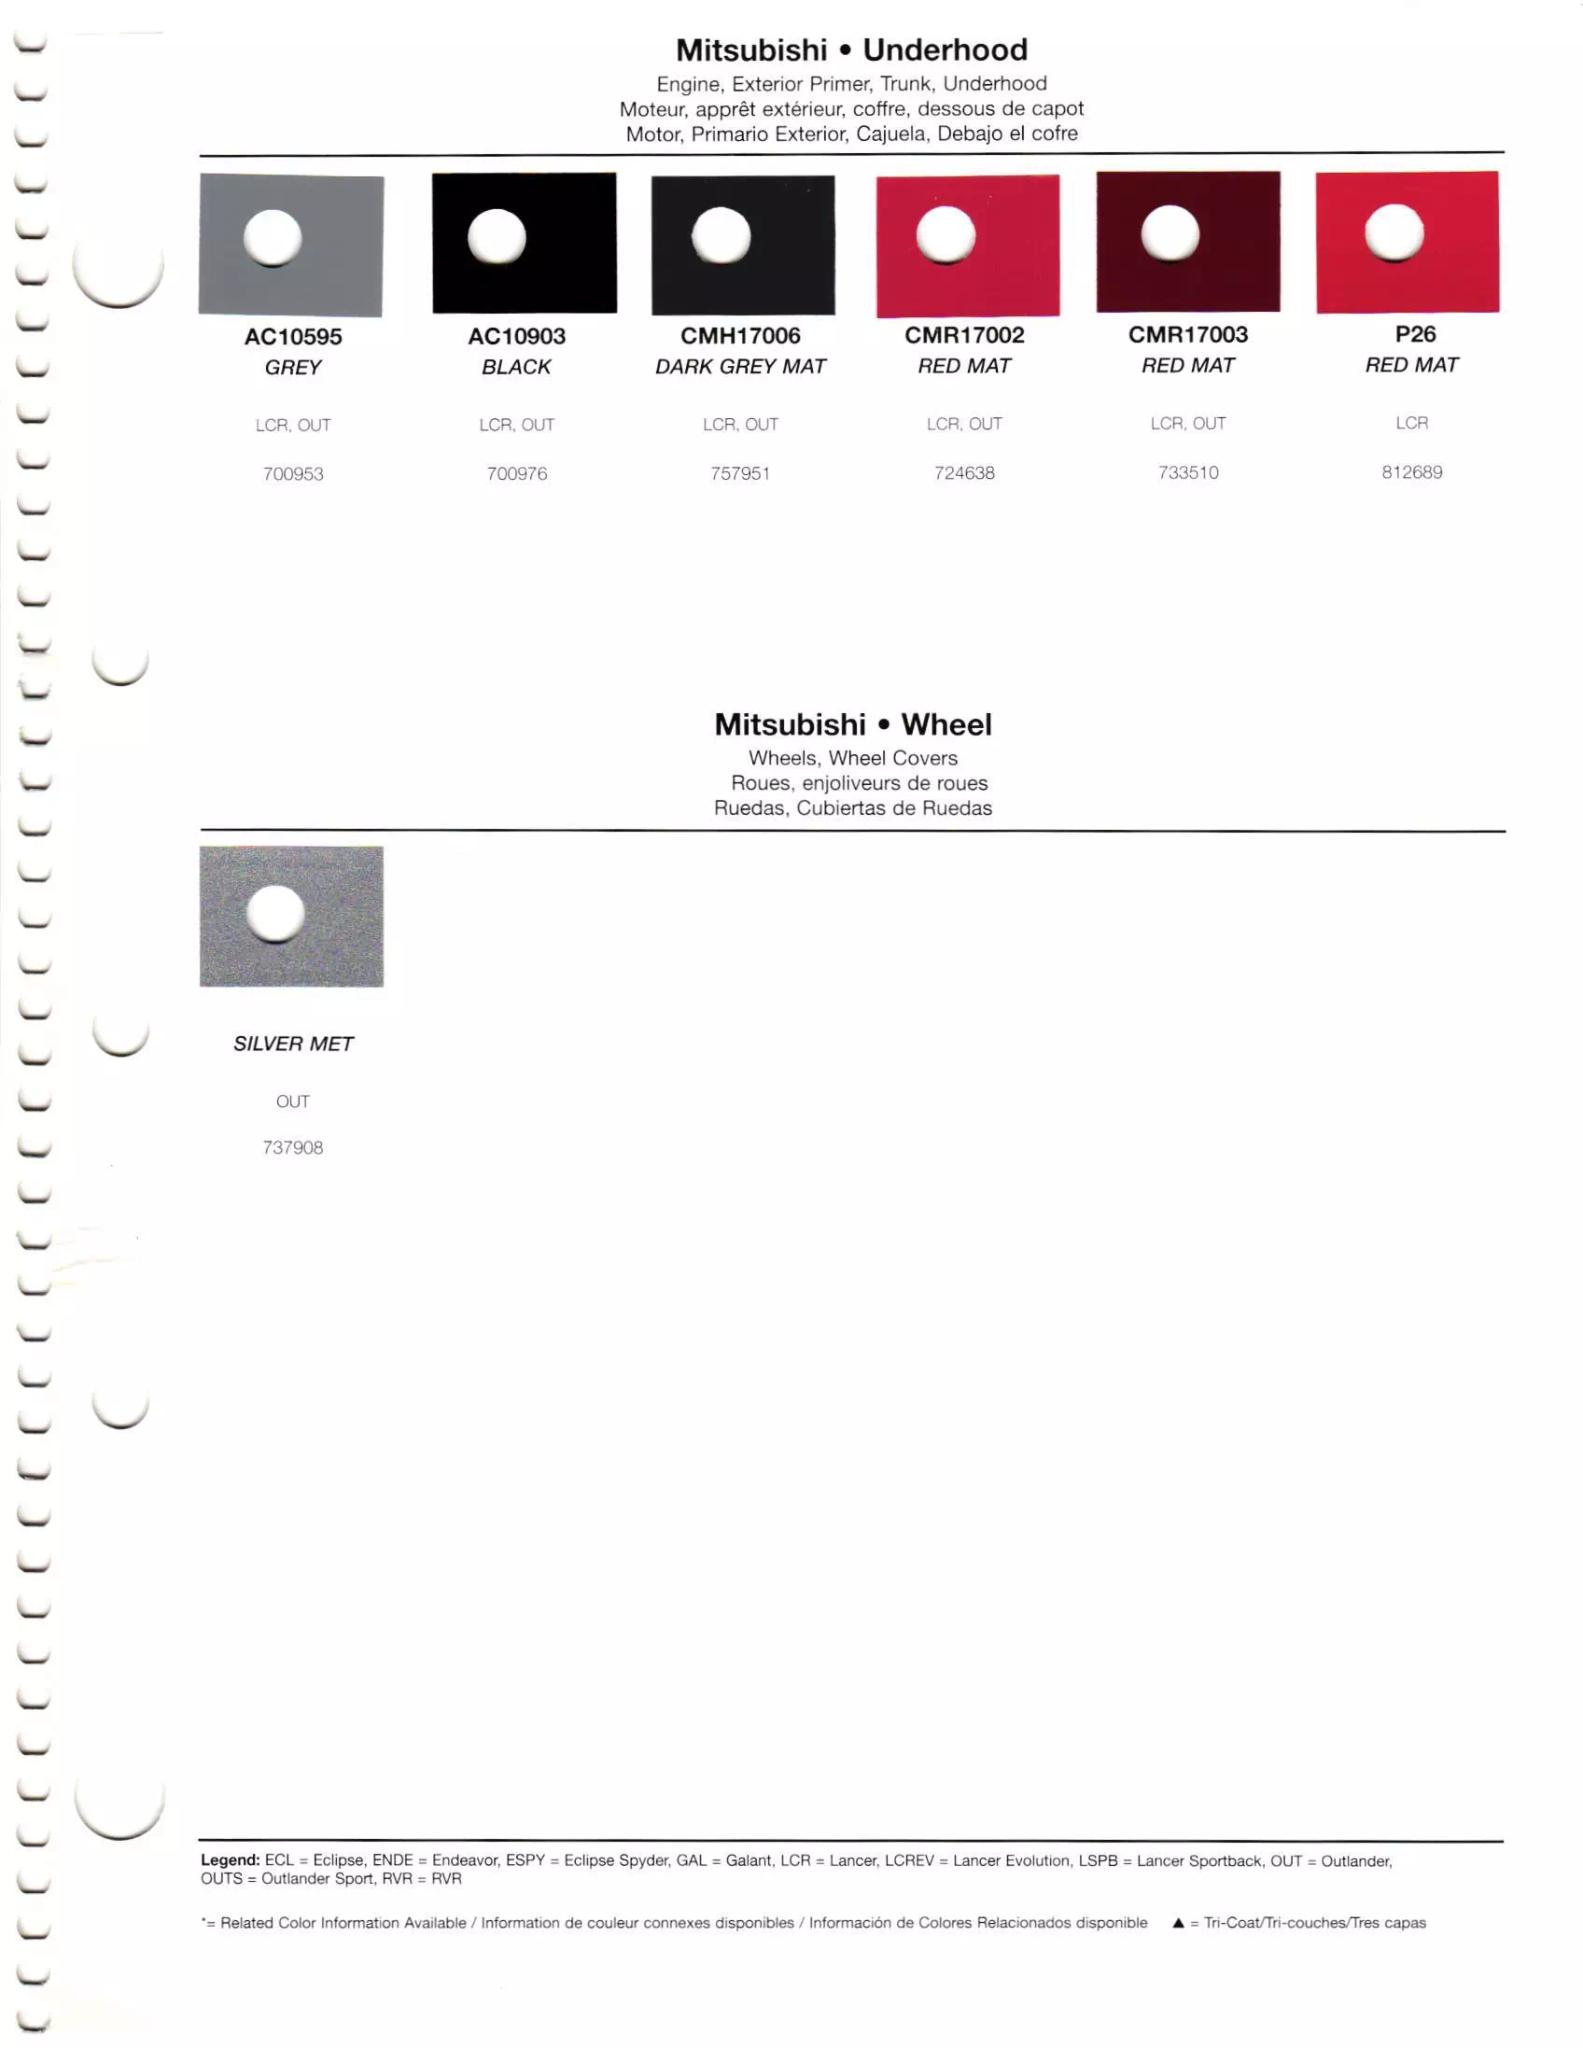 a color chart showing 2011 Mitsubishi exterior paint codes, and their color names.